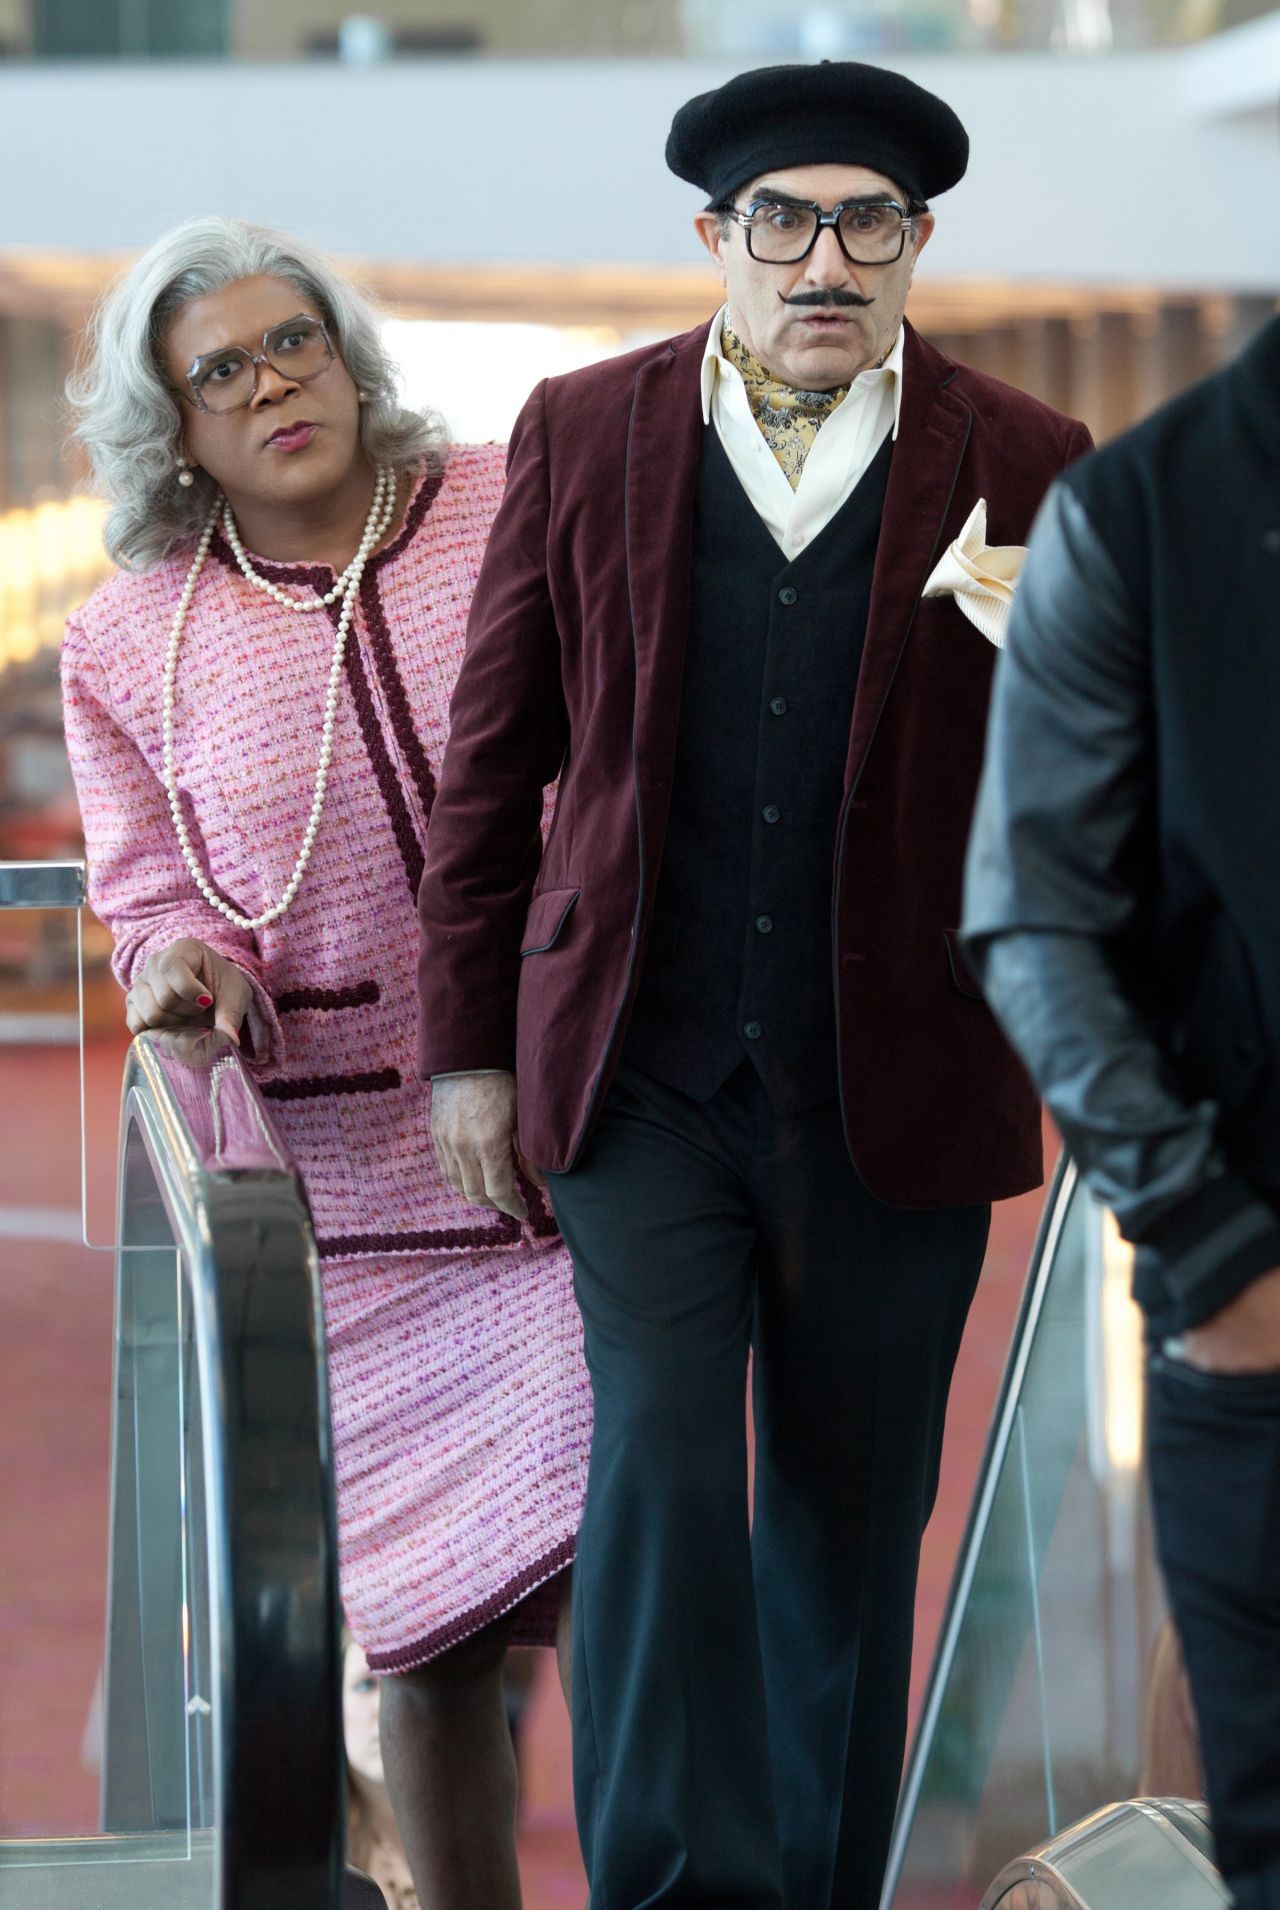 Tyler Perry stars as Madea/Joe/Brian and Eugene Levy stars as George Needleman in Lionsgate's Madea's Witness Protection (2012). Photo credit by KC Bailey.